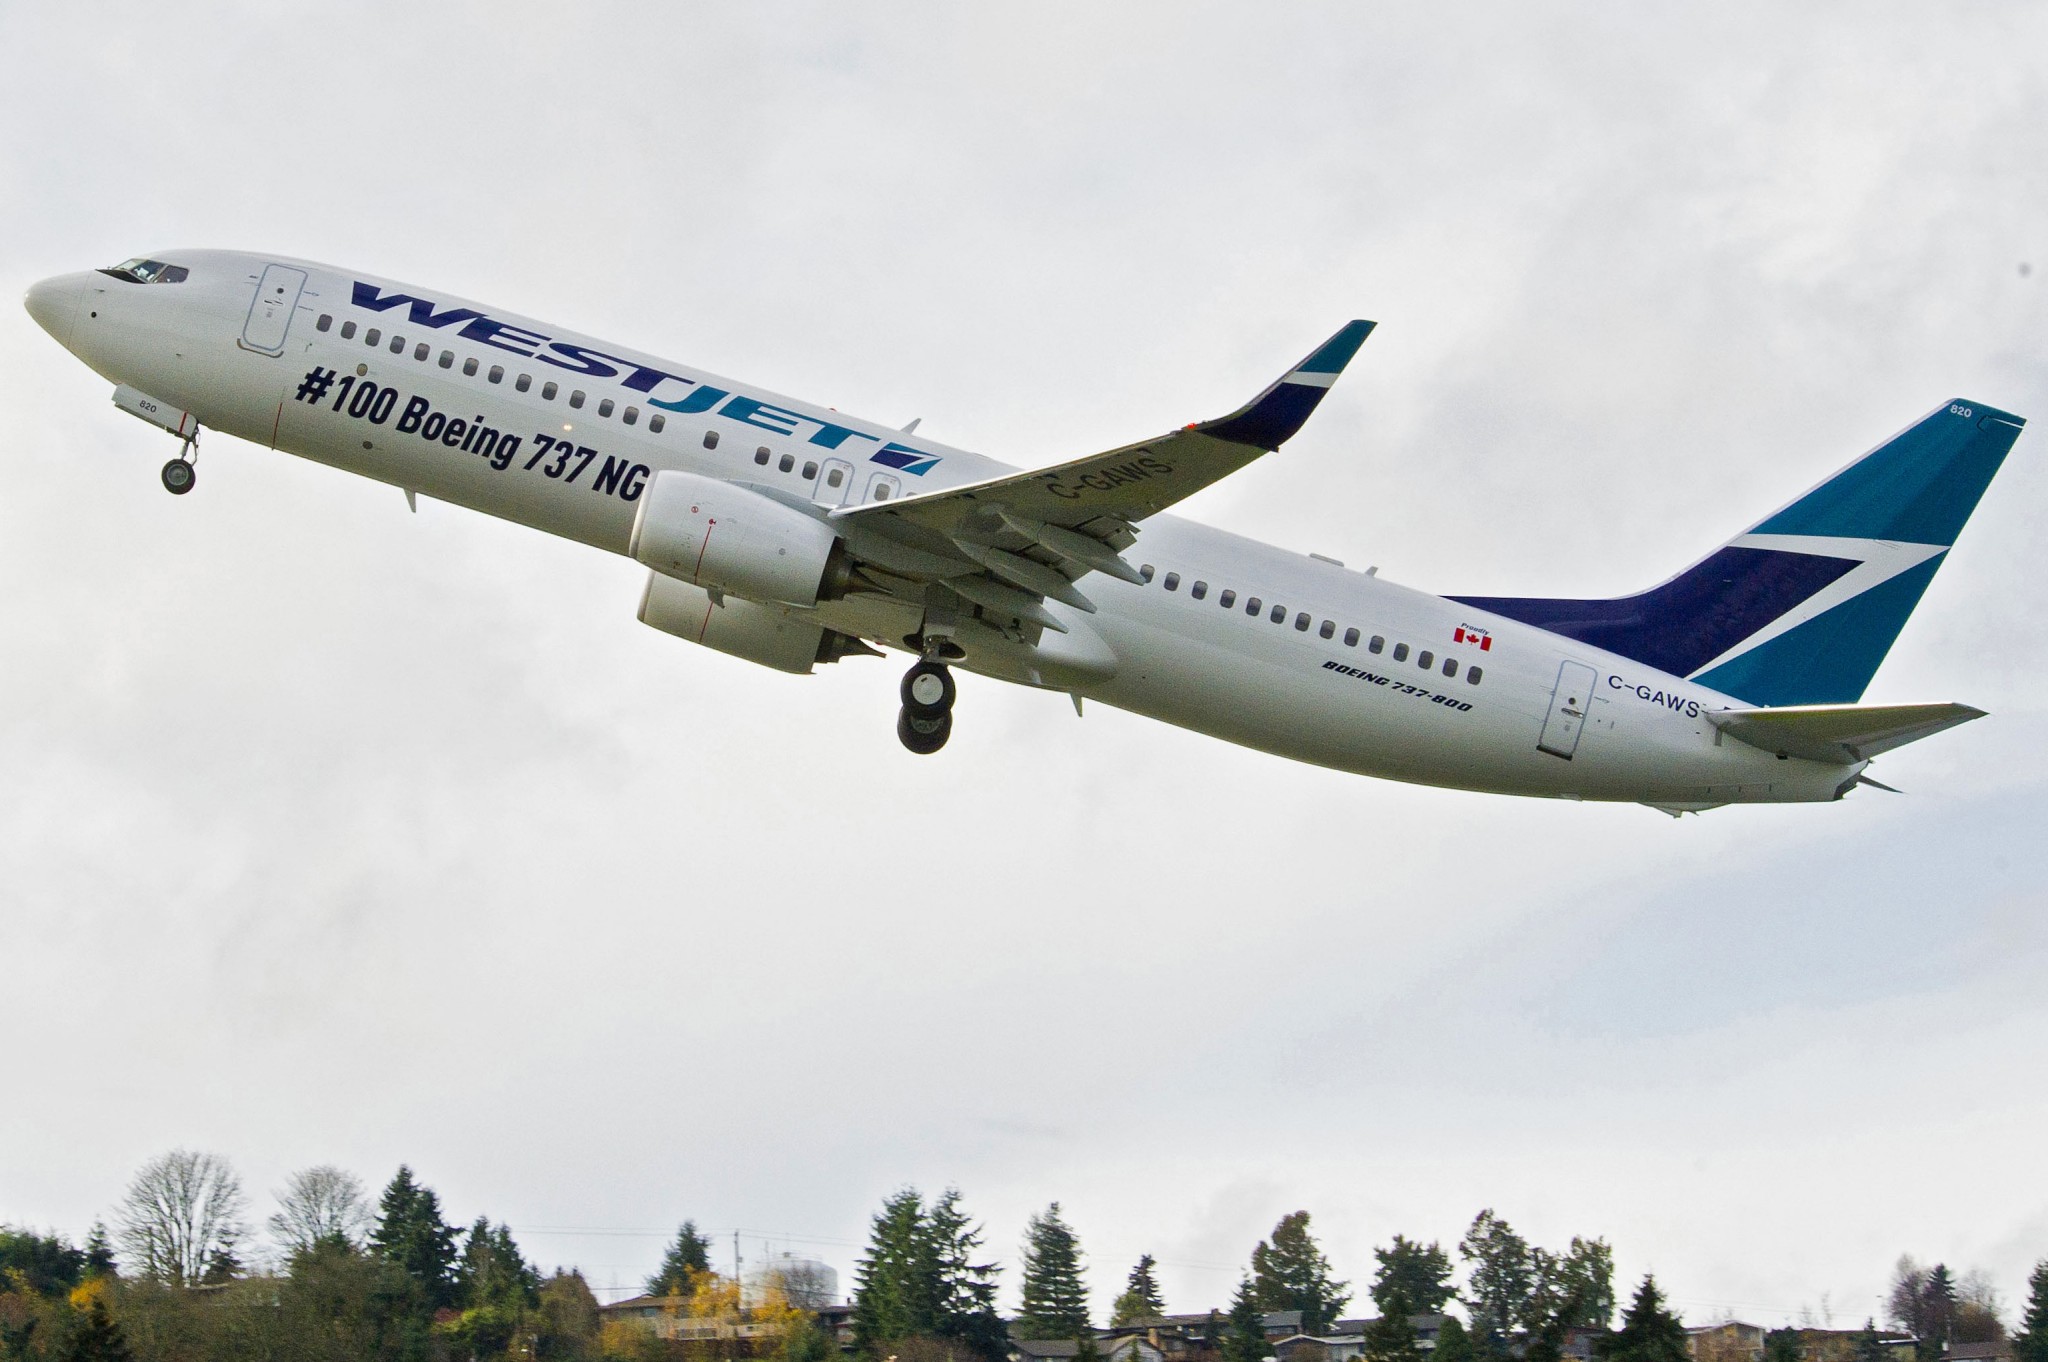 WestJet Airlines posts higher than expected revenues increase in Q3 2019